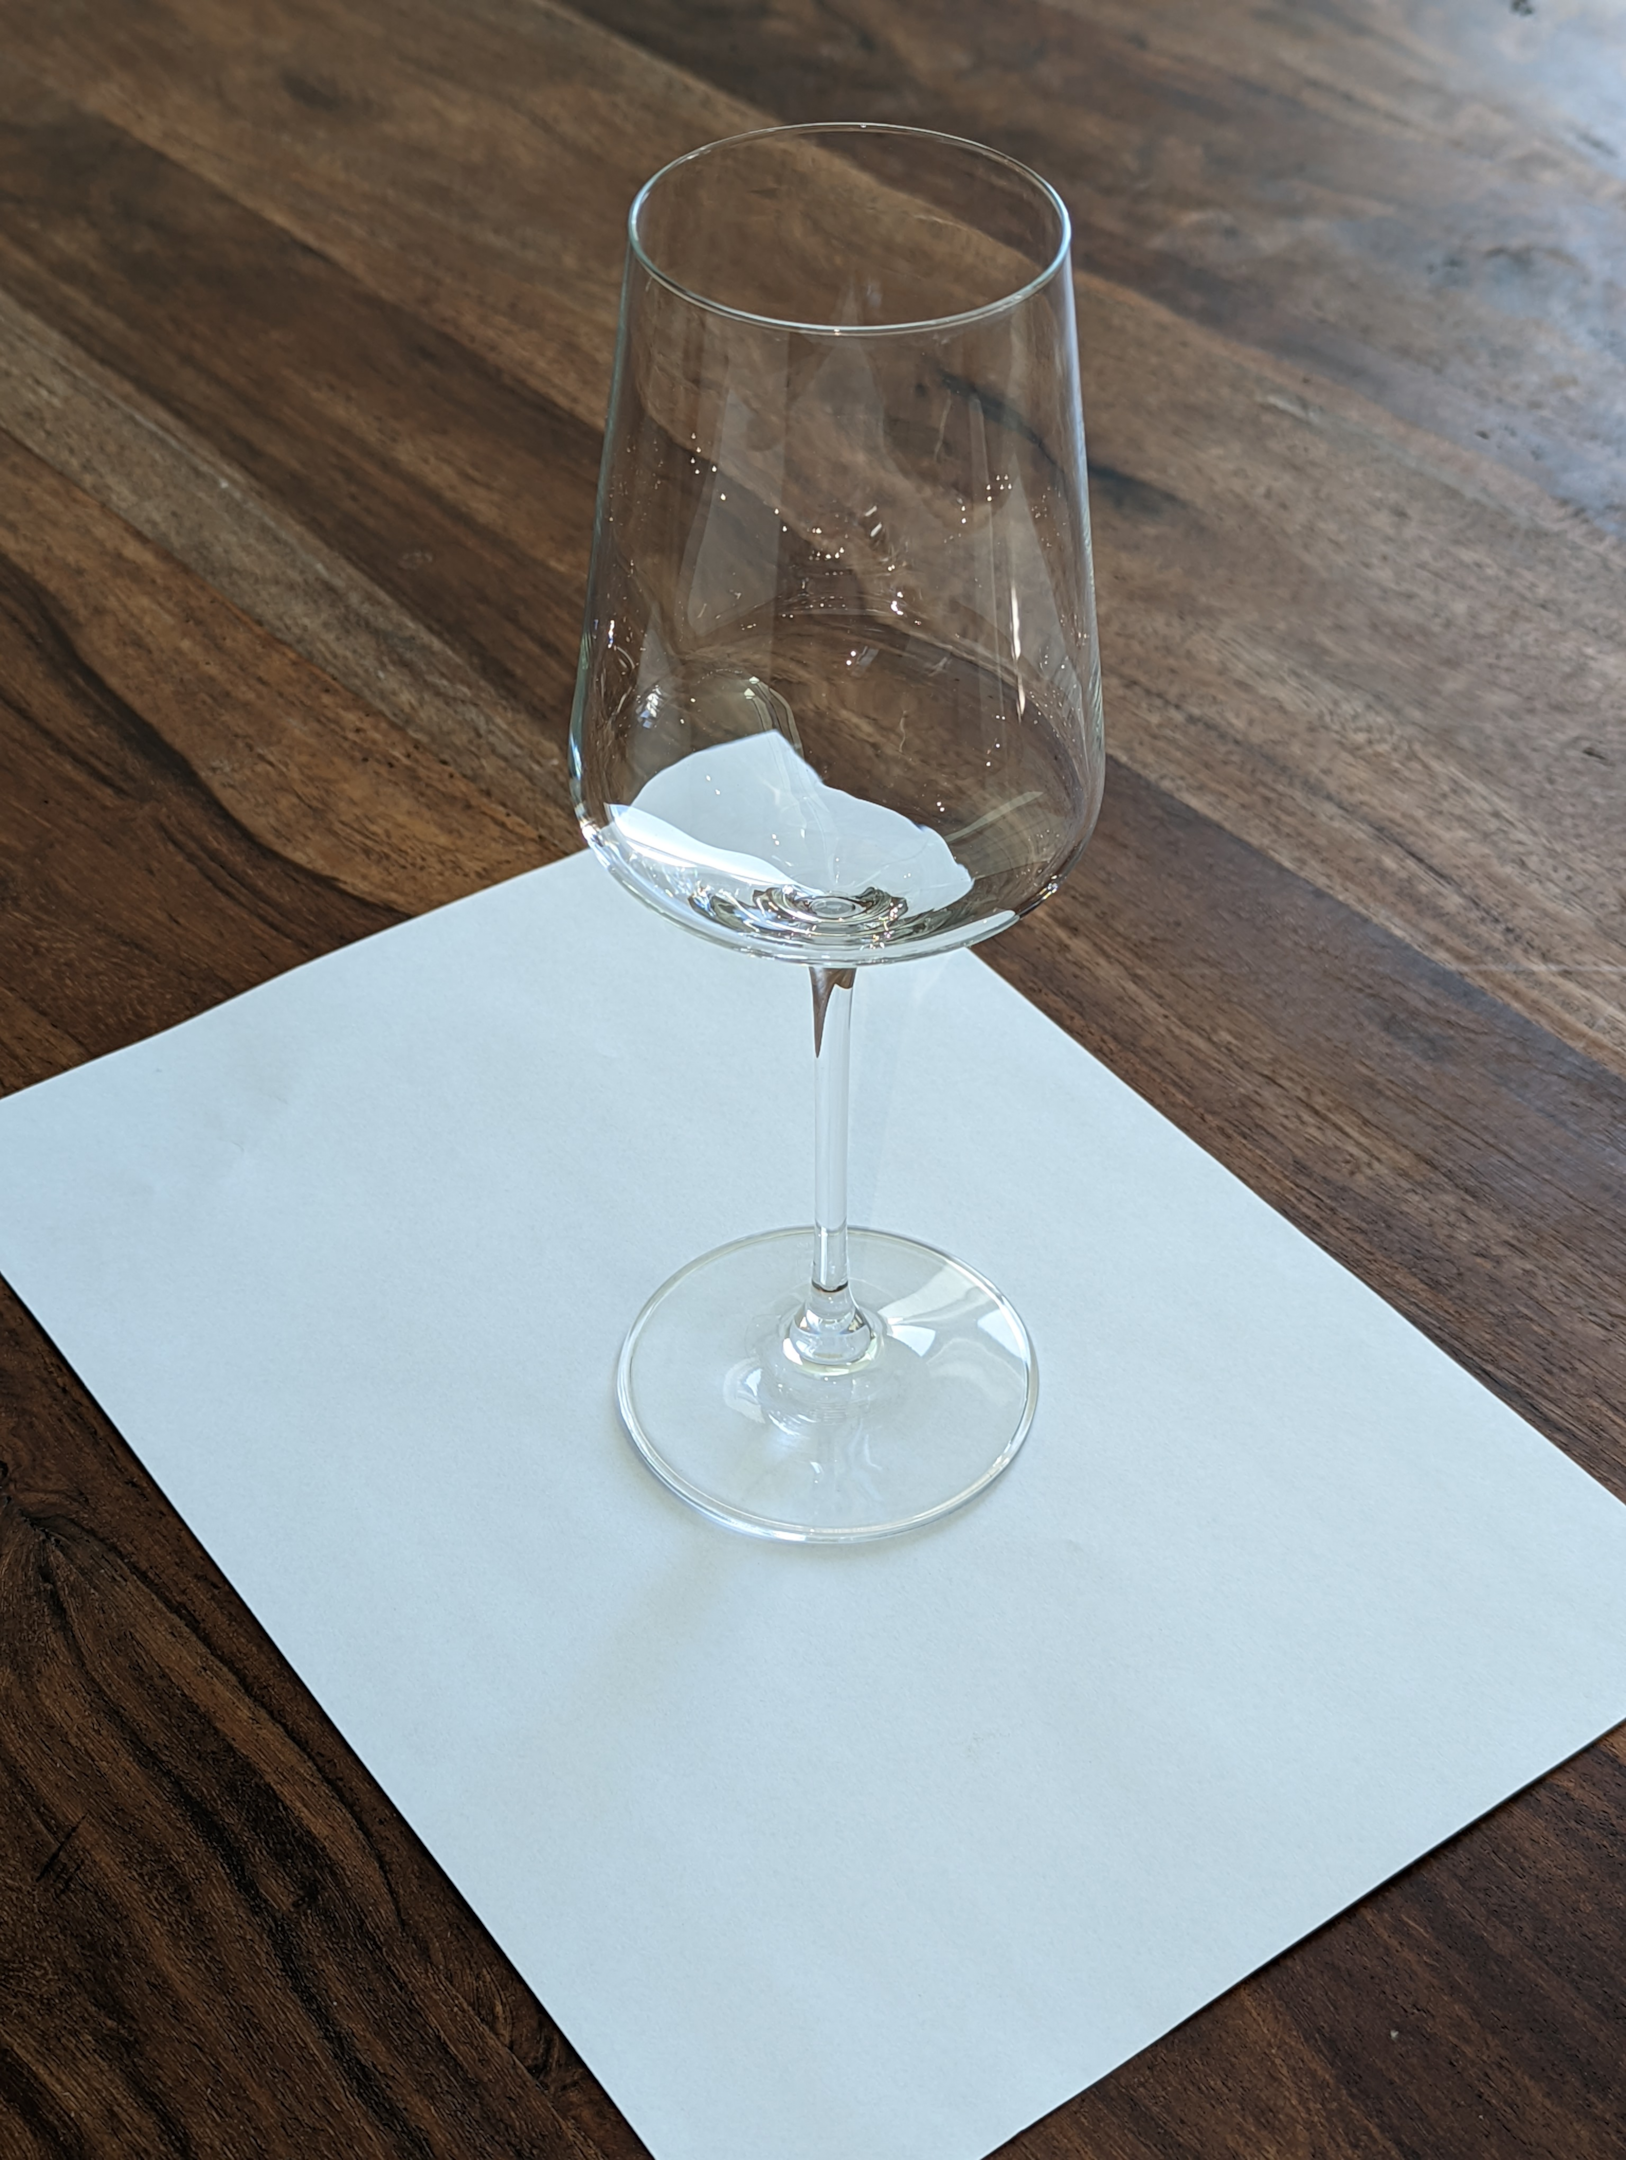 Photo of a wine glass